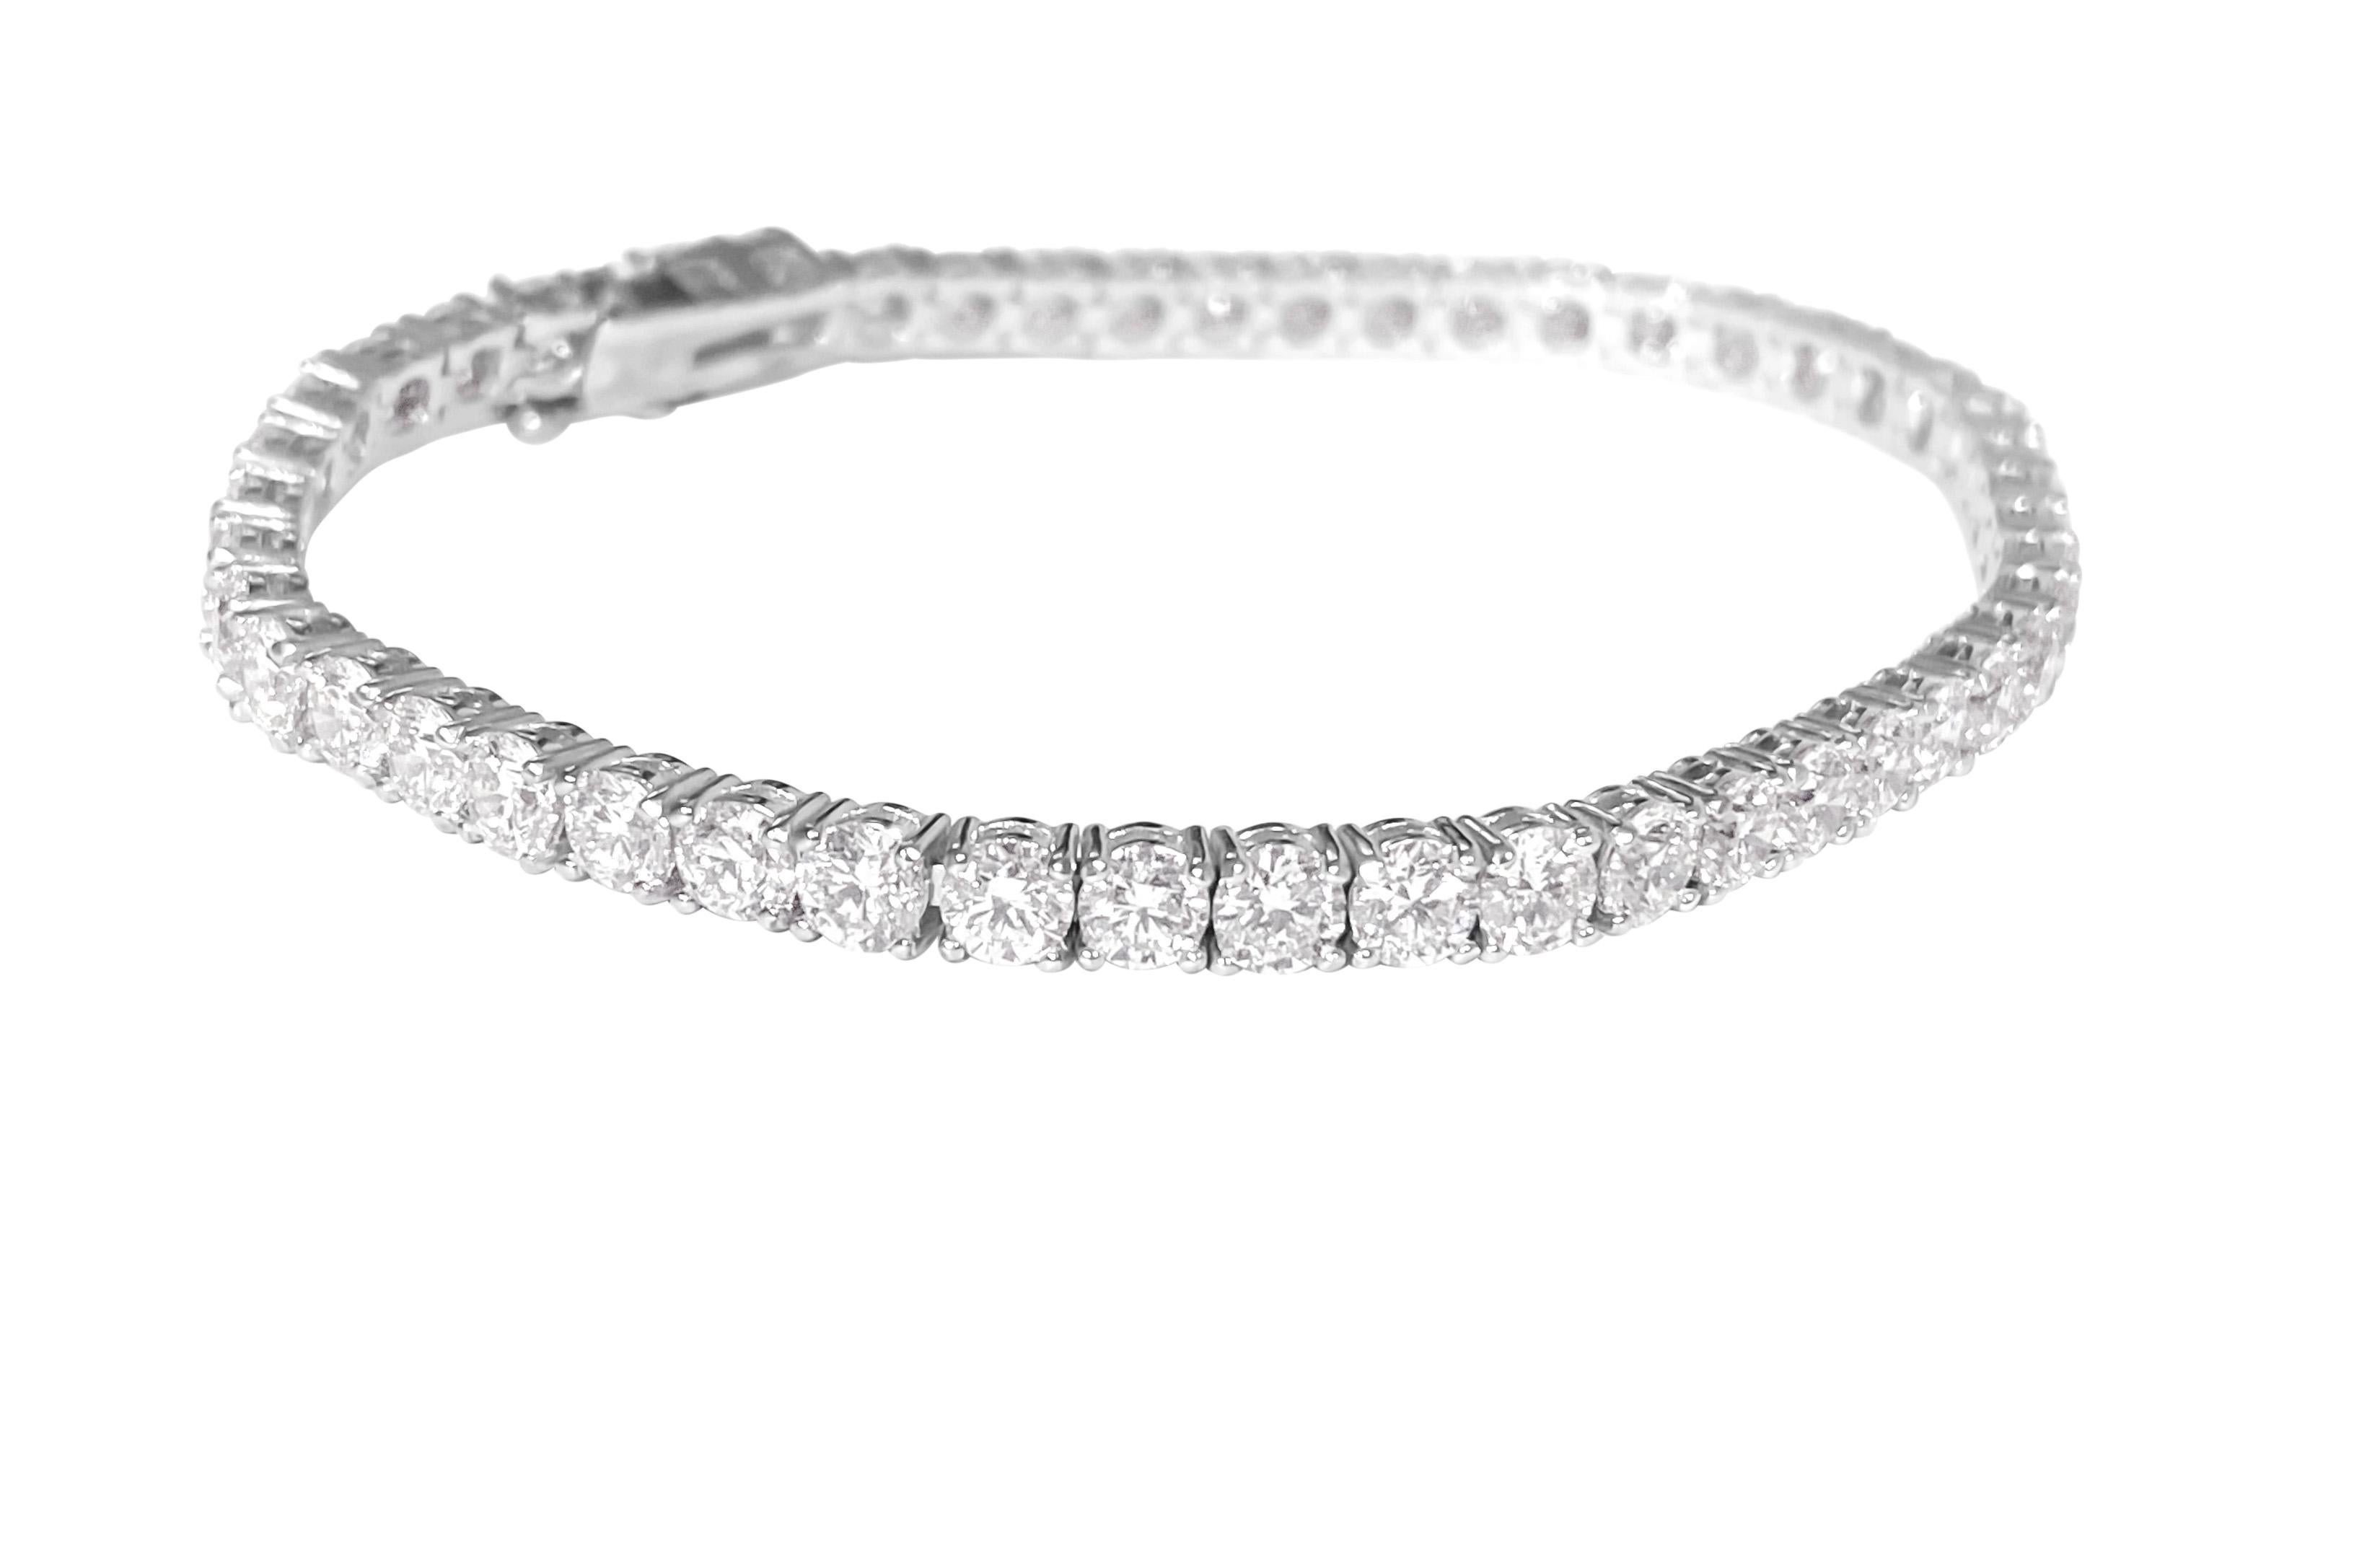 Elegance embodied in this exquisite piece! Behold a 14k white gold tennis bracelet adorned with 9.10 carats of round brilliant cut diamonds, boasting VVS clarity and sourced entirely from natural earth mines.

Key Features:

Metal: Shimmering 14k